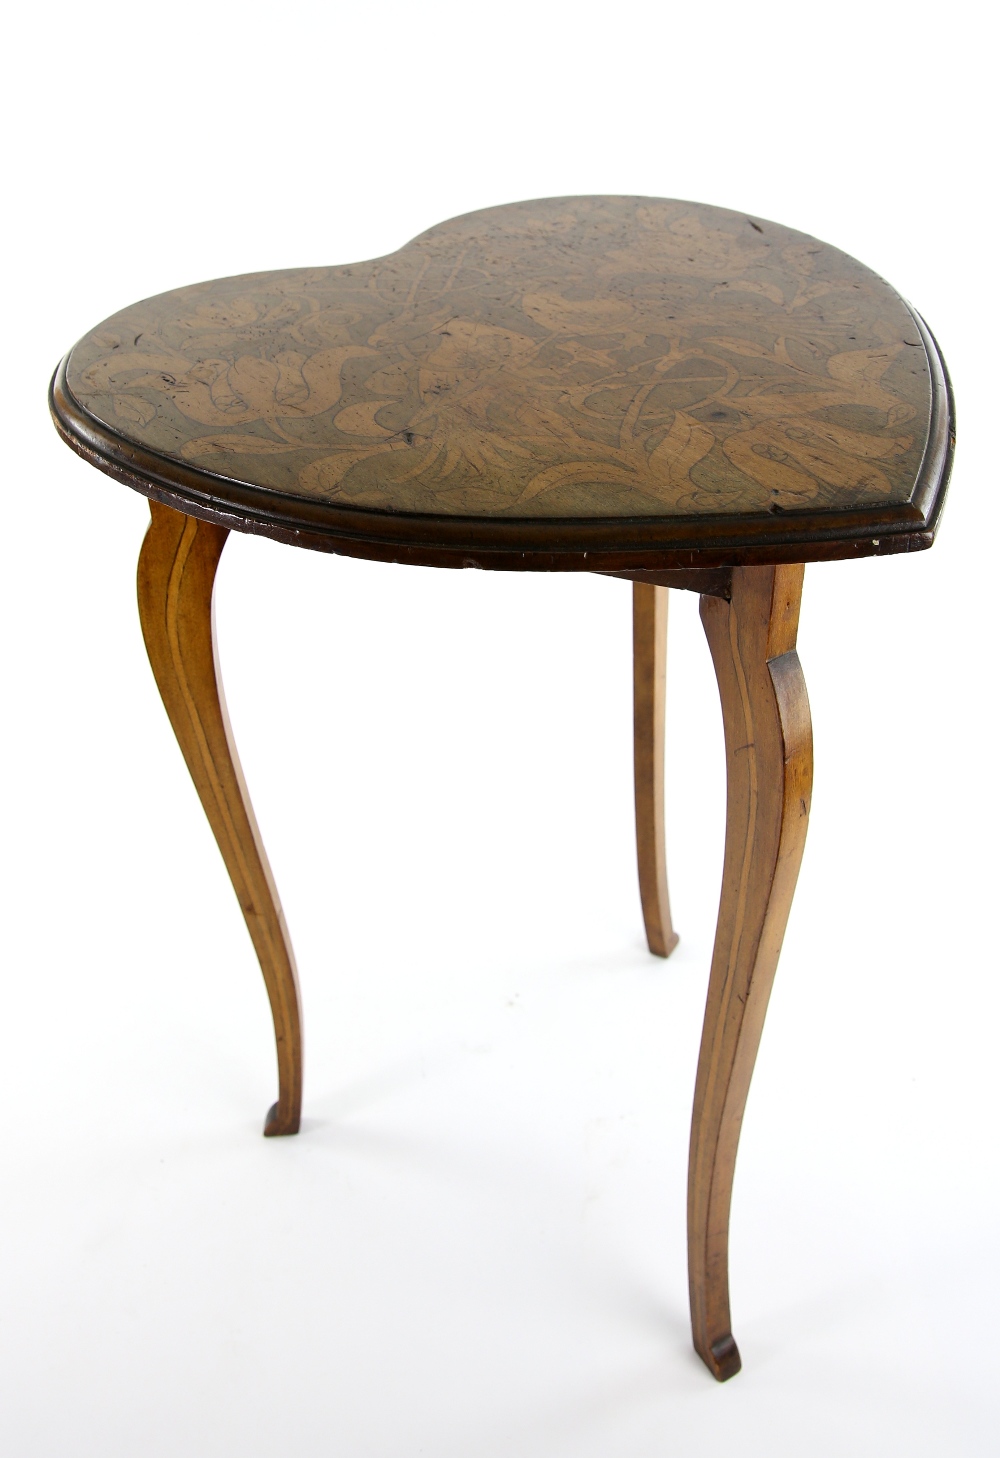 Early 20th C heart top occasional table with pen work decoration of two birds amongst foliage, .